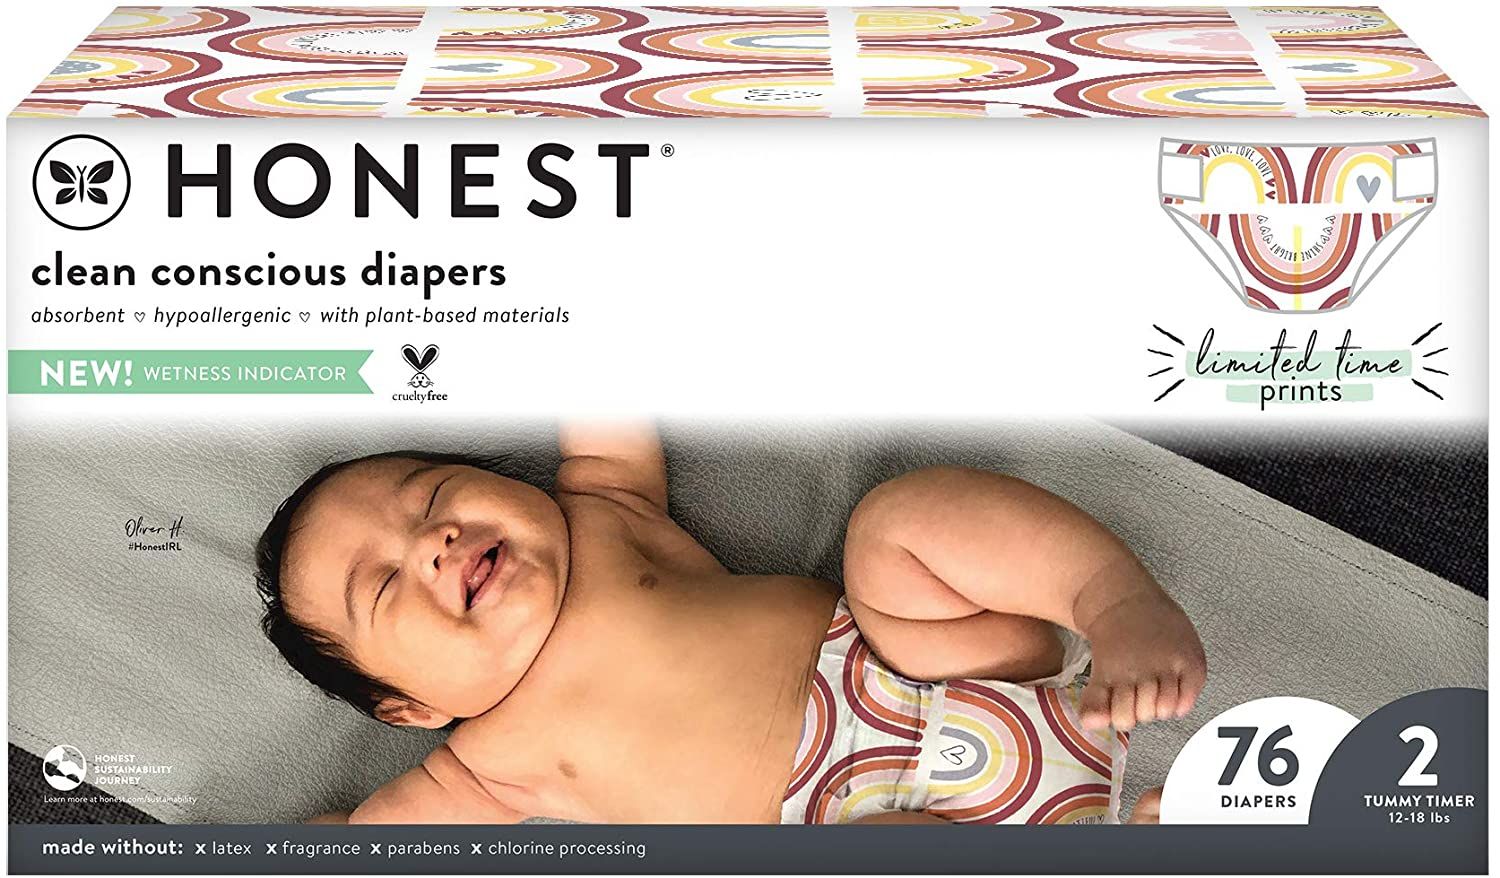 HONEST Club Box, Clean Conscious Diapers, Spring Seasonal - Catching Rainbows, Size 2, 76 Count